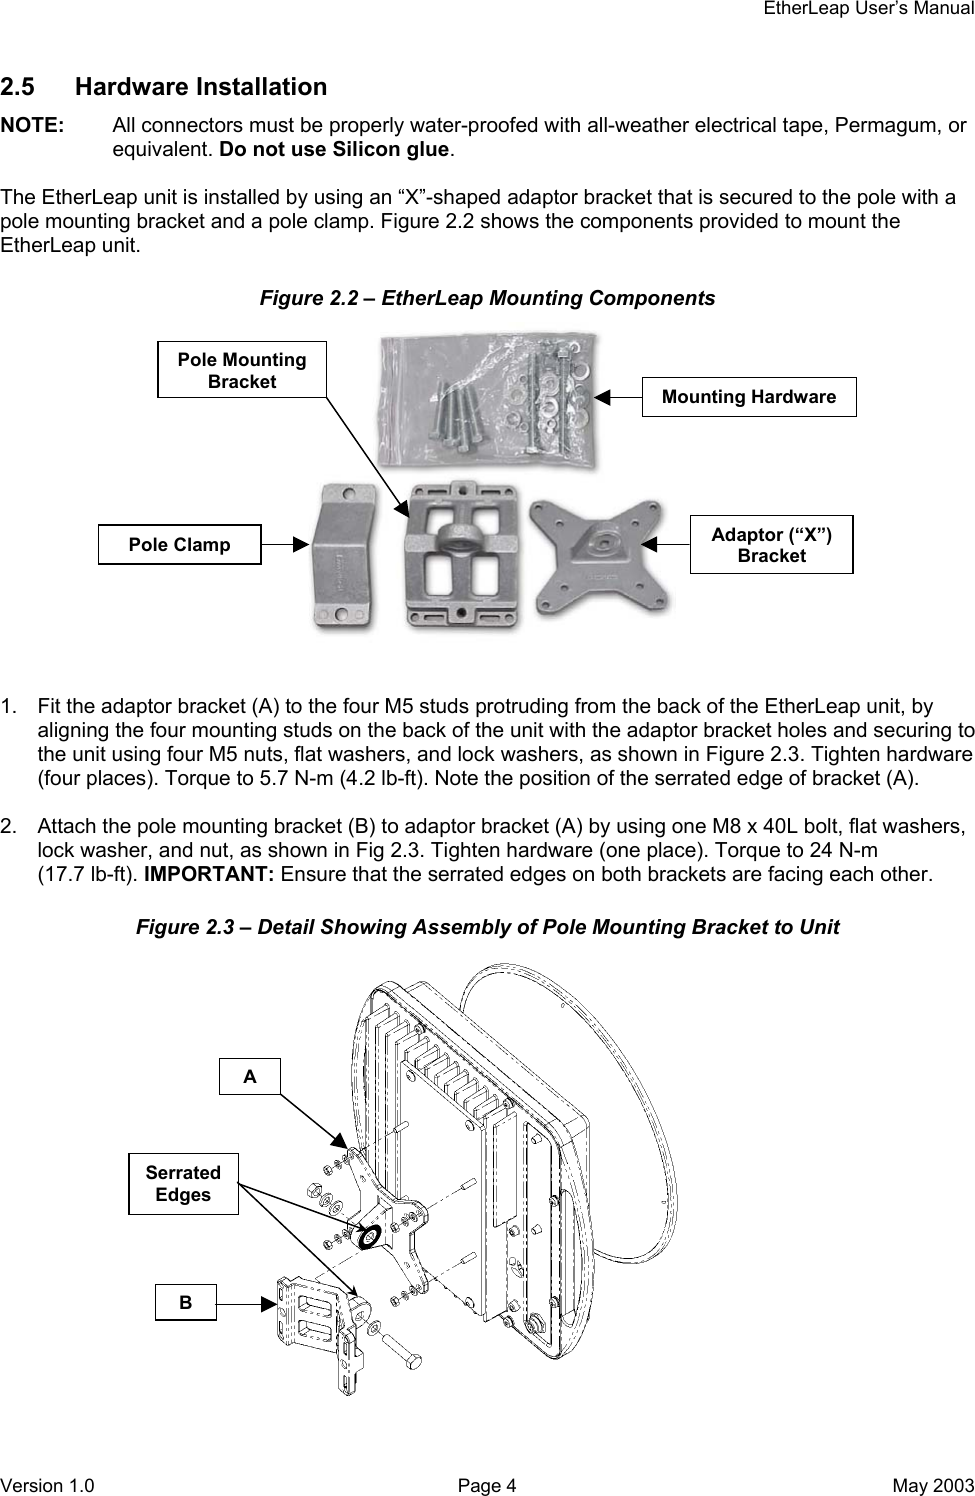     EtherLeap User’s Manual 2.5 Hardware Installation NOTE:  All connectors must be properly water-proofed with all-weather electrical tape, Permagum, or equivalent. Do not use Silicon glue.  The EtherLeap unit is installed by using an “X”-shaped adaptor bracket that is secured to the pole with a pole mounting bracket and a pole clamp. Figure 2.2 shows the components provided to mount the EtherLeap unit. Figure 2.2 – EtherLeap Mounting Components  Mounting Hardware Pole Clamp Pole Mounting Bracket Adaptor (“X”) Bracket   1.  Fit the adaptor bracket (A) to the four M5 studs protruding from the back of the EtherLeap unit, by aligning the four mounting studs on the back of the unit with the adaptor bracket holes and securing to the unit using four M5 nuts, flat washers, and lock washers, as shown in Figure 2.3. Tighten hardware (four places). Torque to 5.7 N-m (4.2 lb-ft). Note the position of the serrated edge of bracket (A).  2.  Attach the pole mounting bracket (B) to adaptor bracket (A) by using one M8 x 40L bolt, flat washers, lock washer, and nut, as shown in Fig 2.3. Tighten hardware (one place). Torque to 24 N-m (17.7 lb-ft). IMPORTANT: Ensure that the serrated edges on both brackets are facing each other. Figure 2.3 – Detail Showing Assembly of Pole Mounting Bracket to Unit  A Serrated Edges B Version 1.0  Page 4  May 2003 